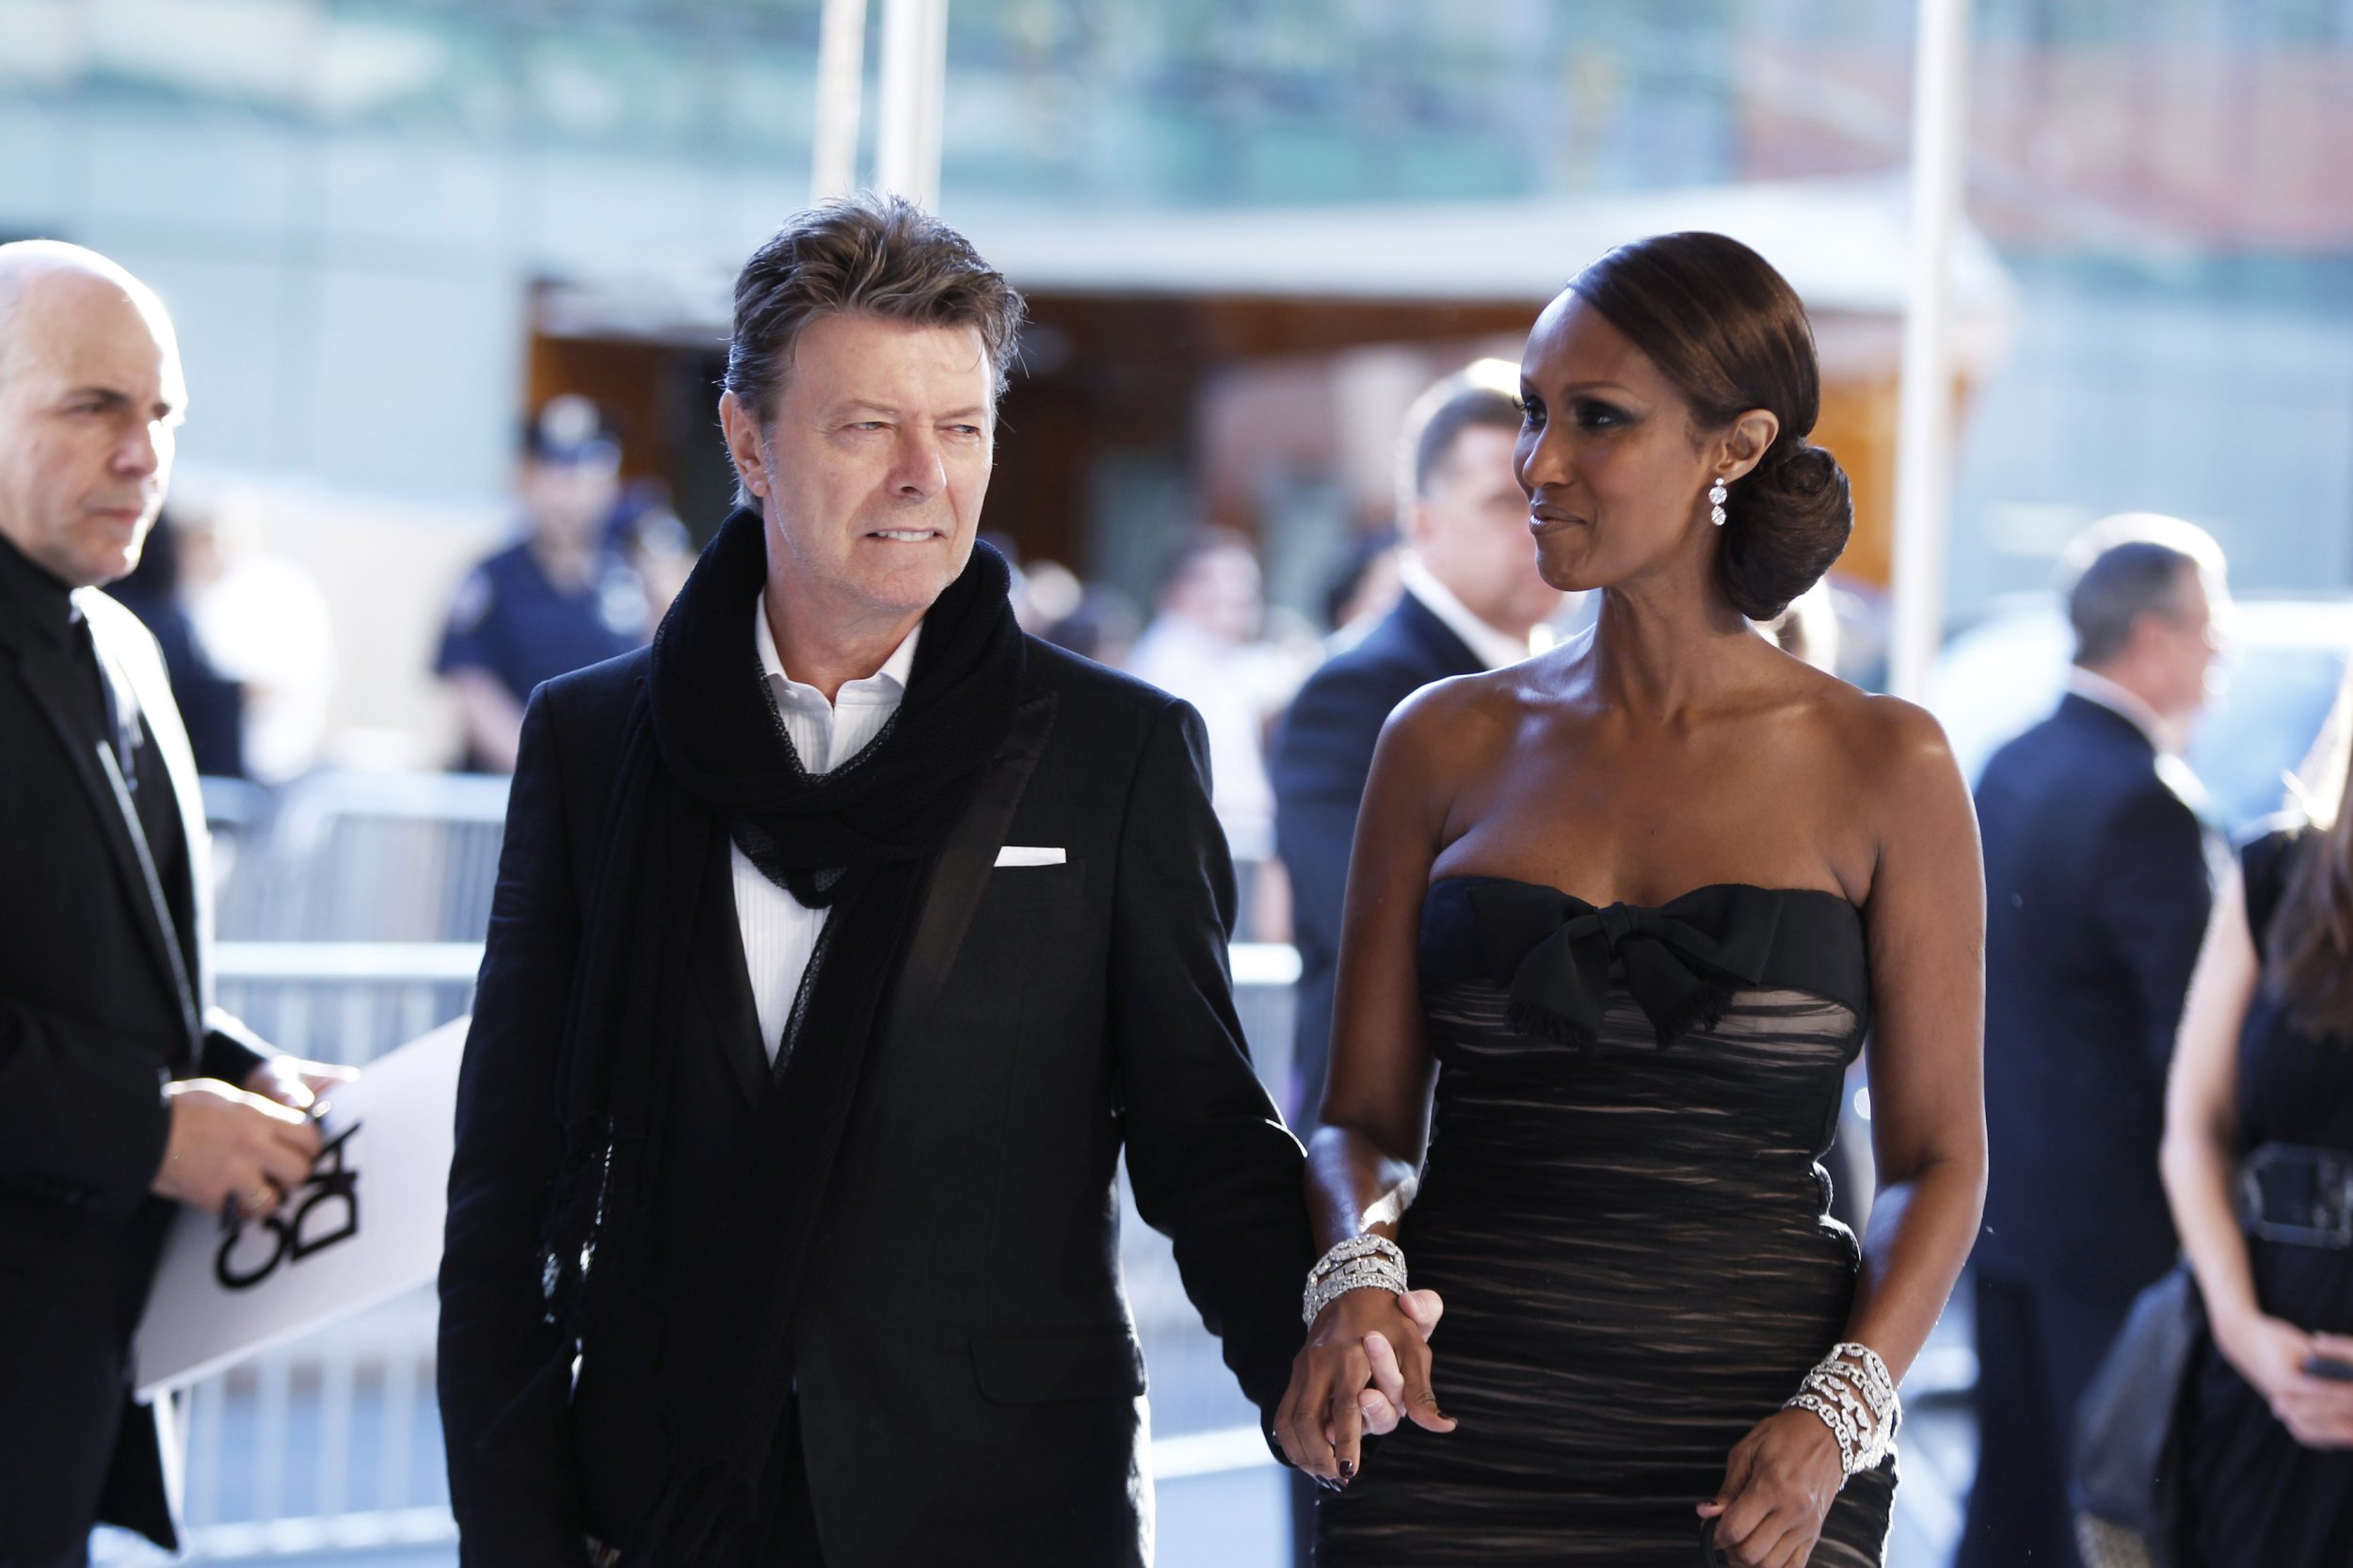 Singer David Bowie arrives with his wife Iman to attend the Council of Fashion Designers of America CFDA fashion awards